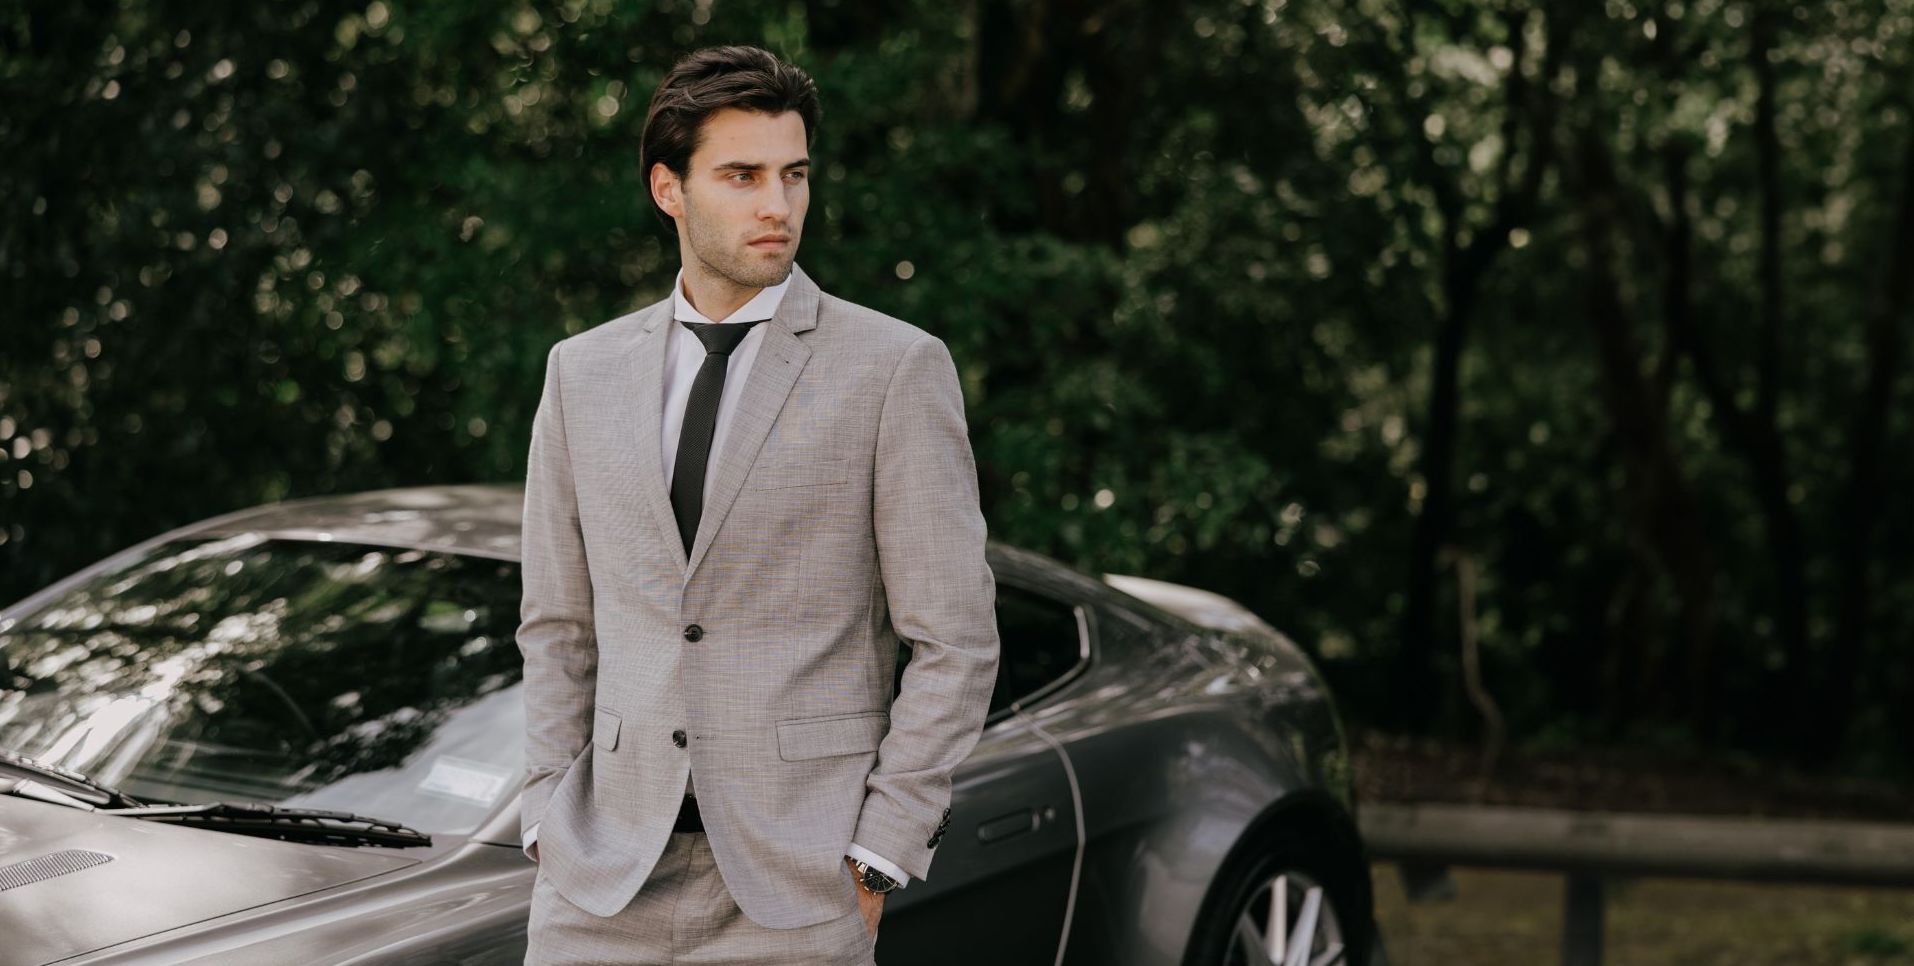 model wearing extreme cutaway collar white dress shirt with grey suit